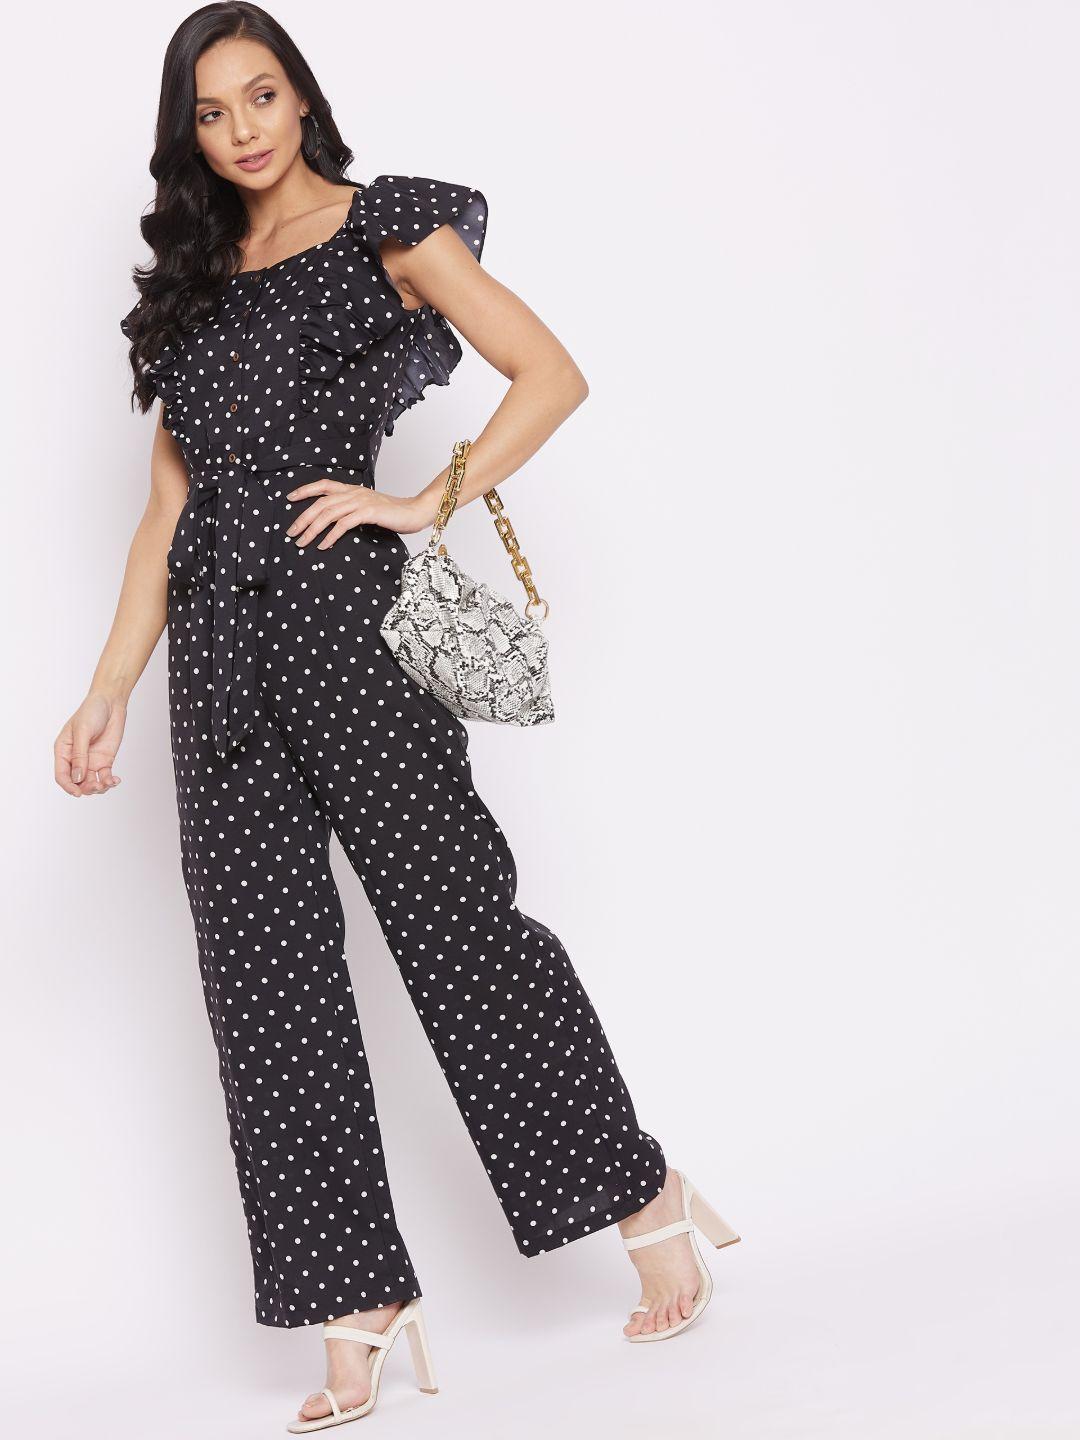 uptownie-lite-black-&-white-printed-basic-jumpsuit-with-ruffles